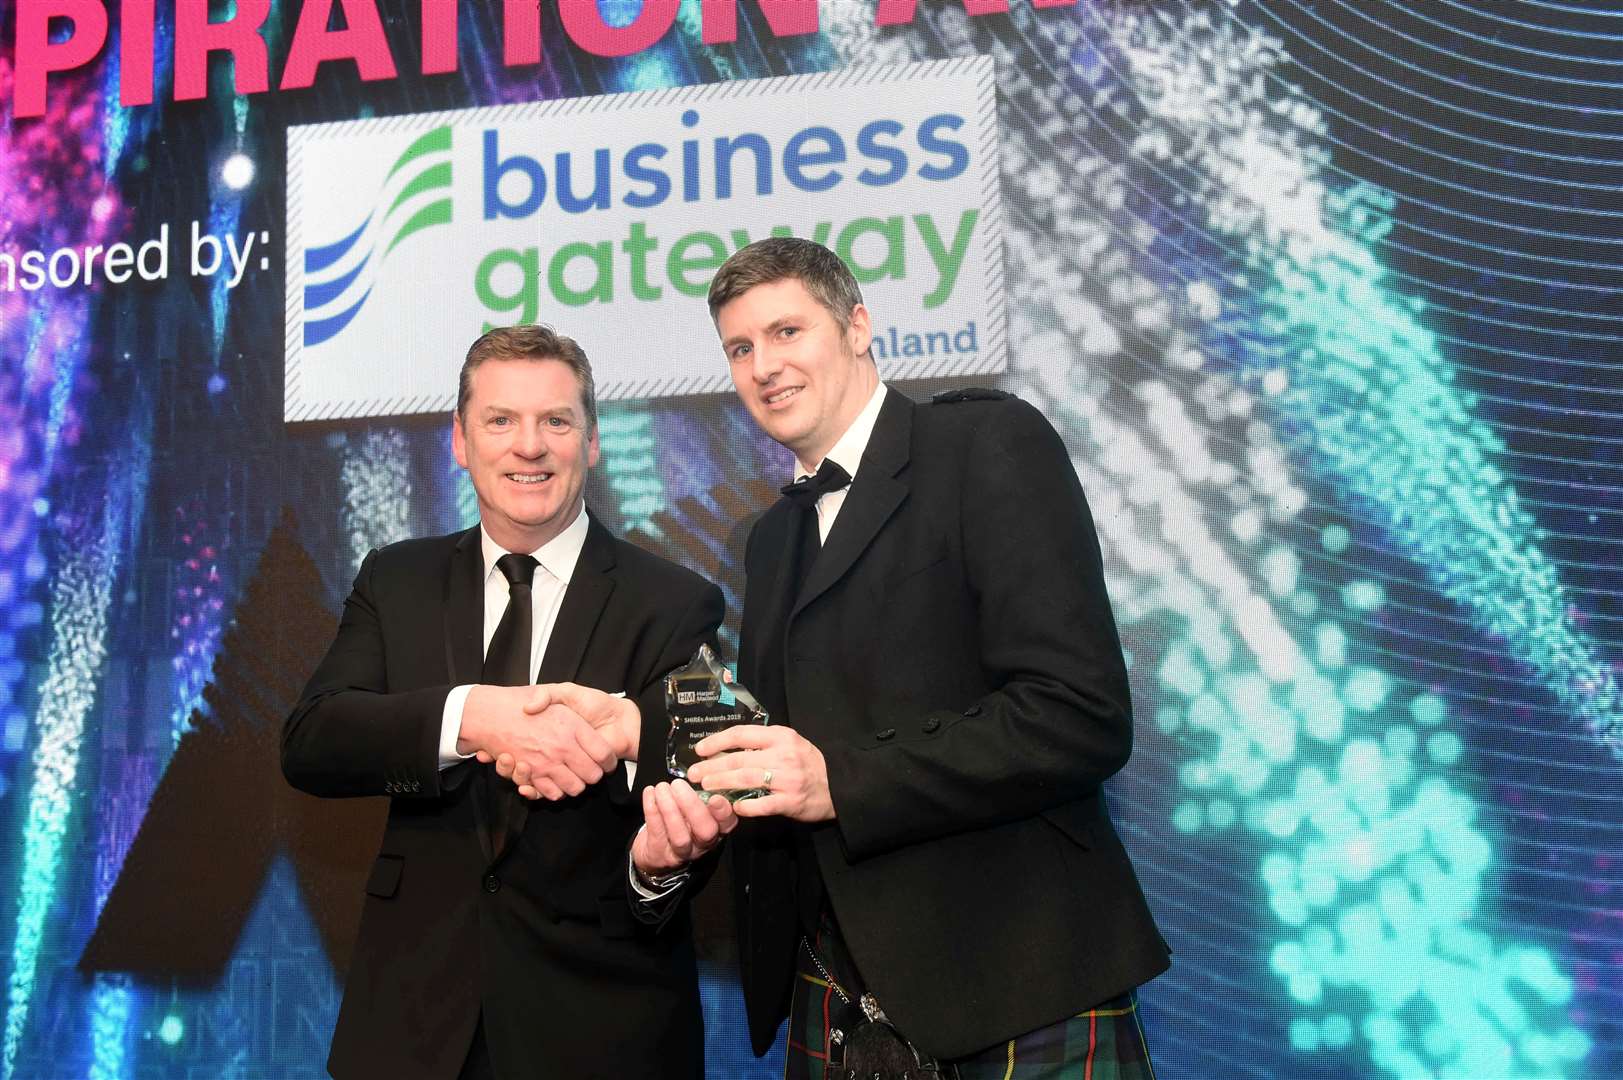 Business Gateway's Danny Gallagher (left) at the 2019 SHIRE's (Scottish Highlands & Island's Rural Economy) Awards with Calum Macleod from law firm Harper Macleod.